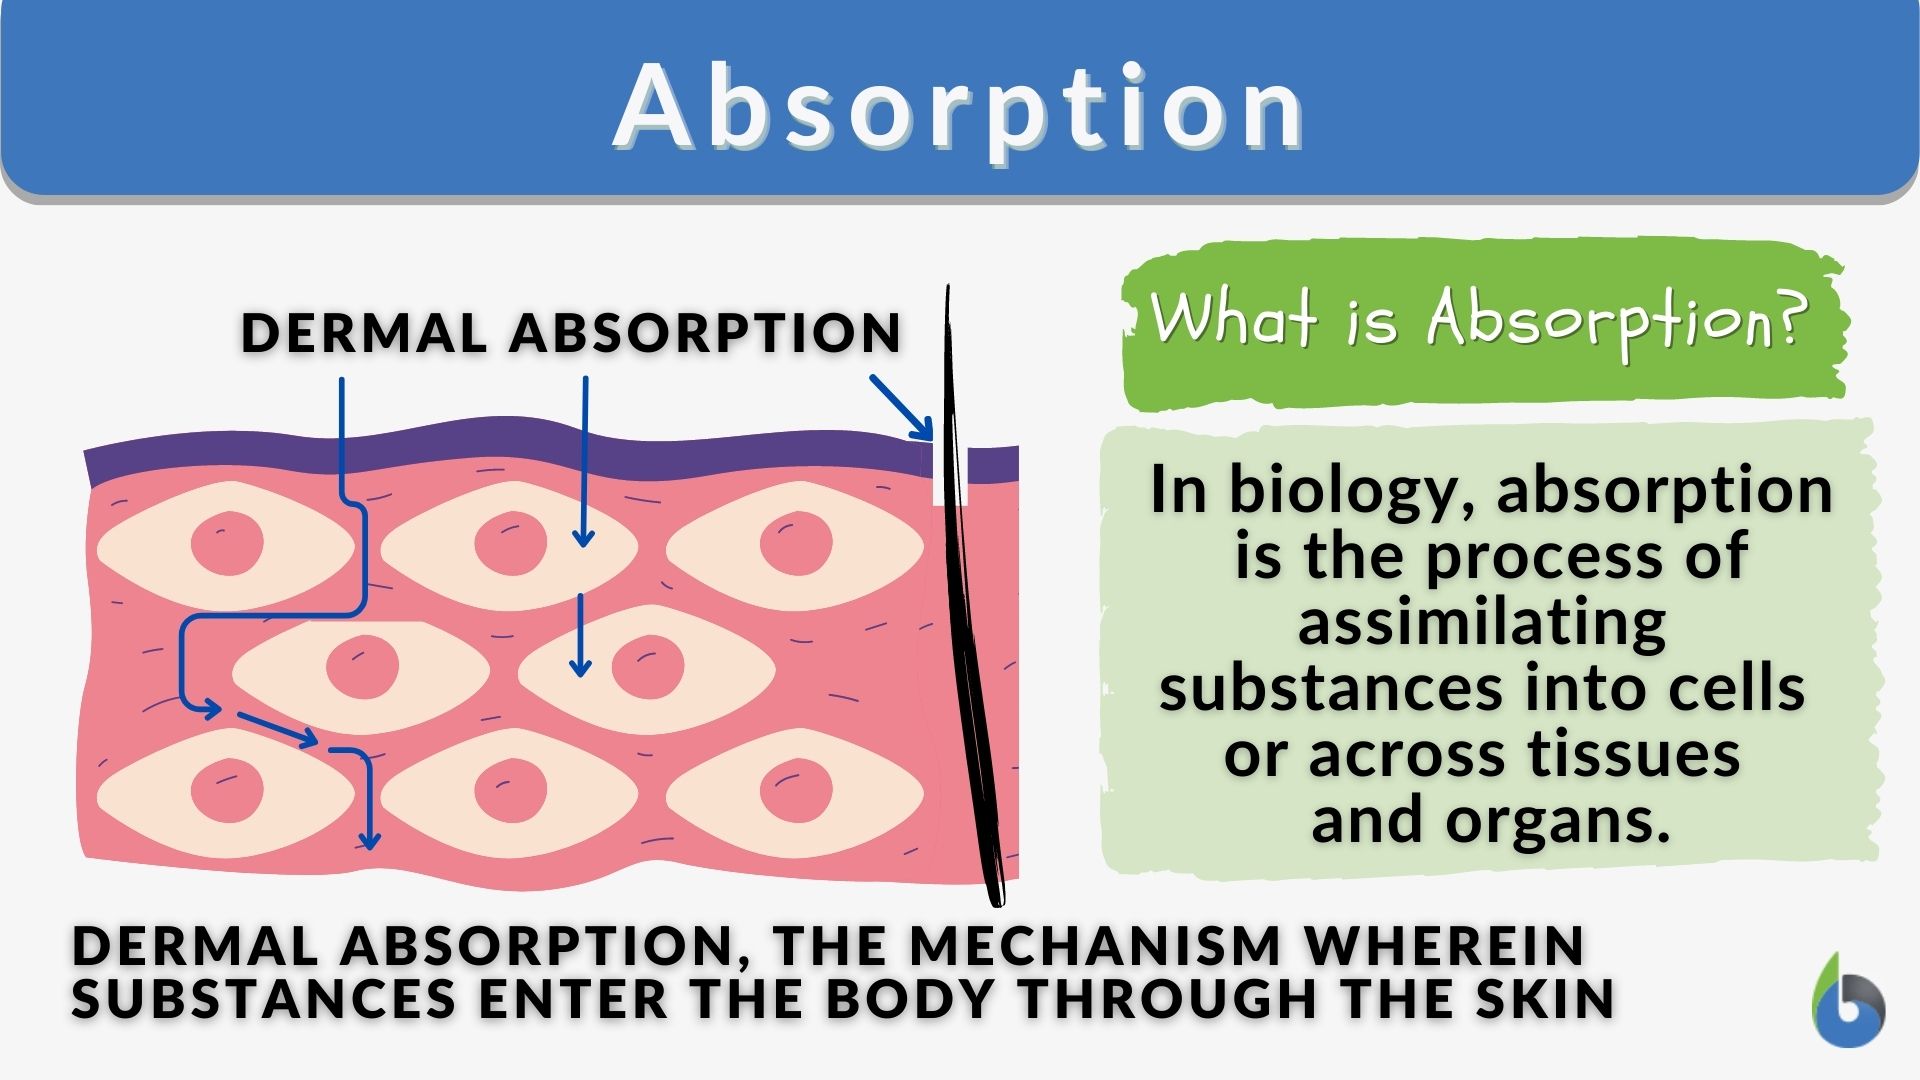 Absorption - Definition and Examples - Biology Online Dictionary